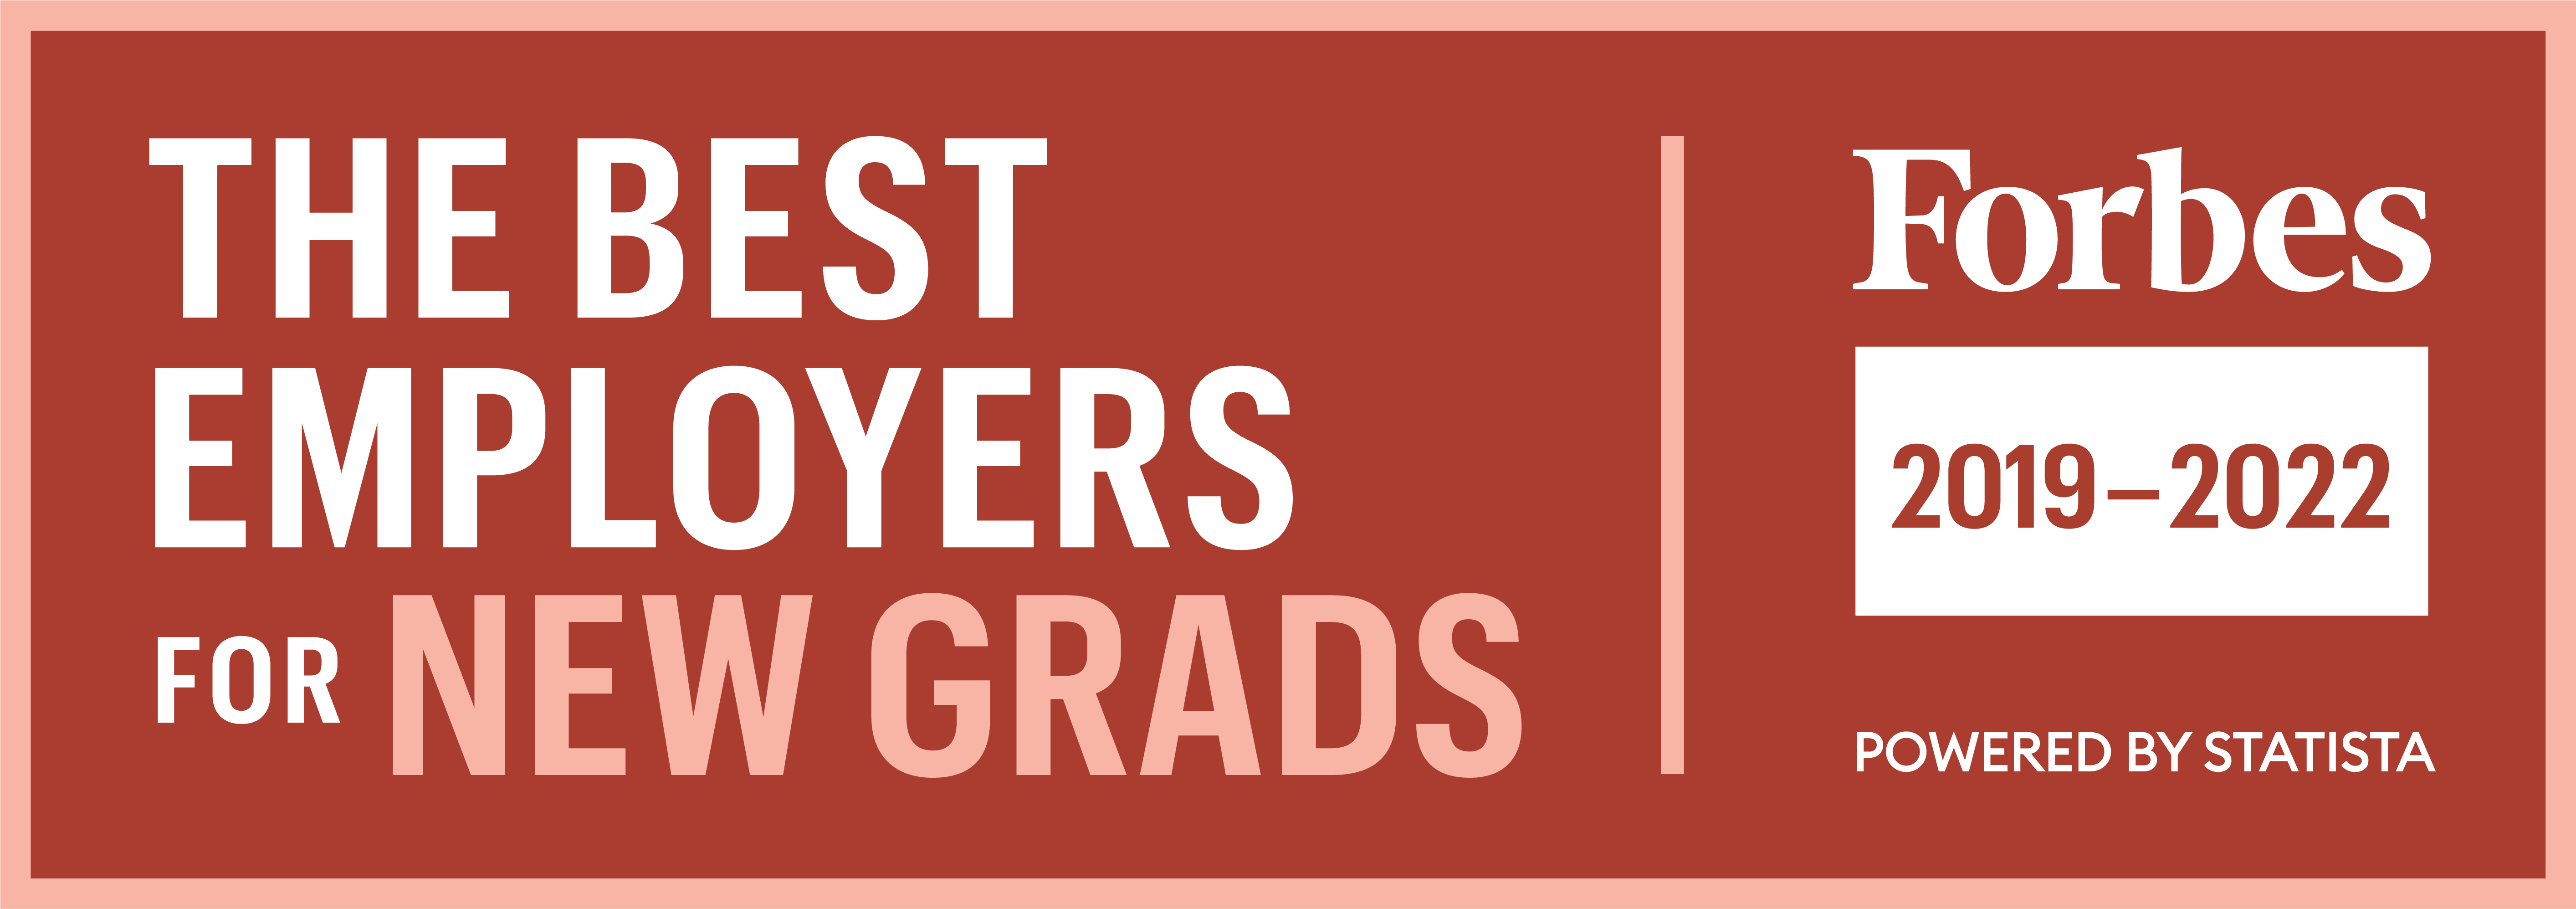 The Best Employers for New Grads 2019-2022